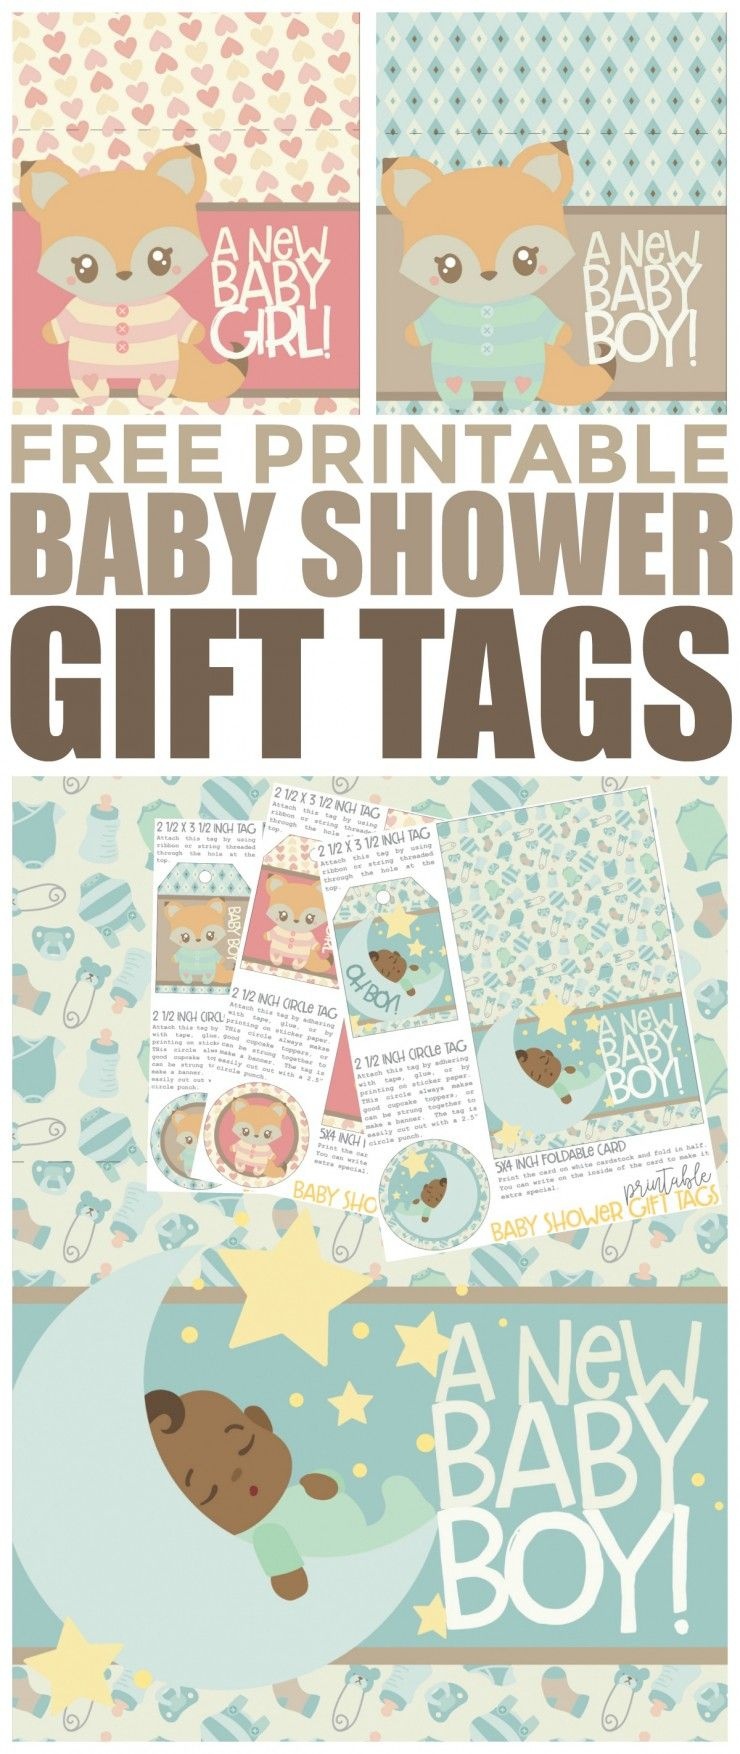 Free Printable Baby Shower Gift Tags | Free Printables | Baby Shower - Free Printable Baby Shower Gift Tags